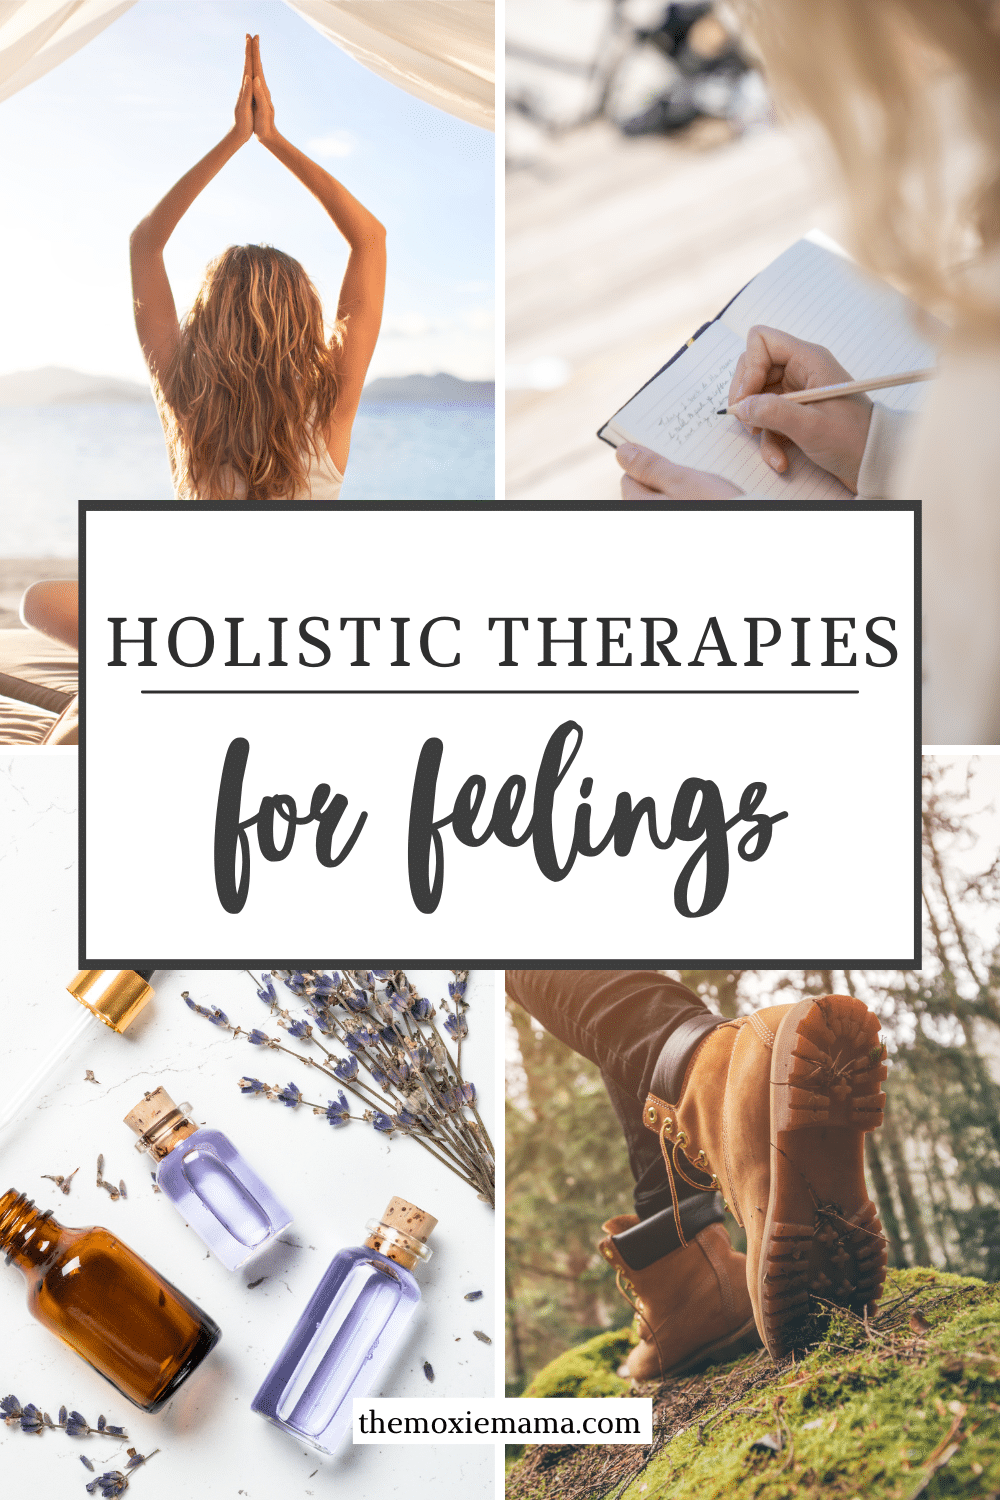 holistic therapies that can help get through tough emotions.